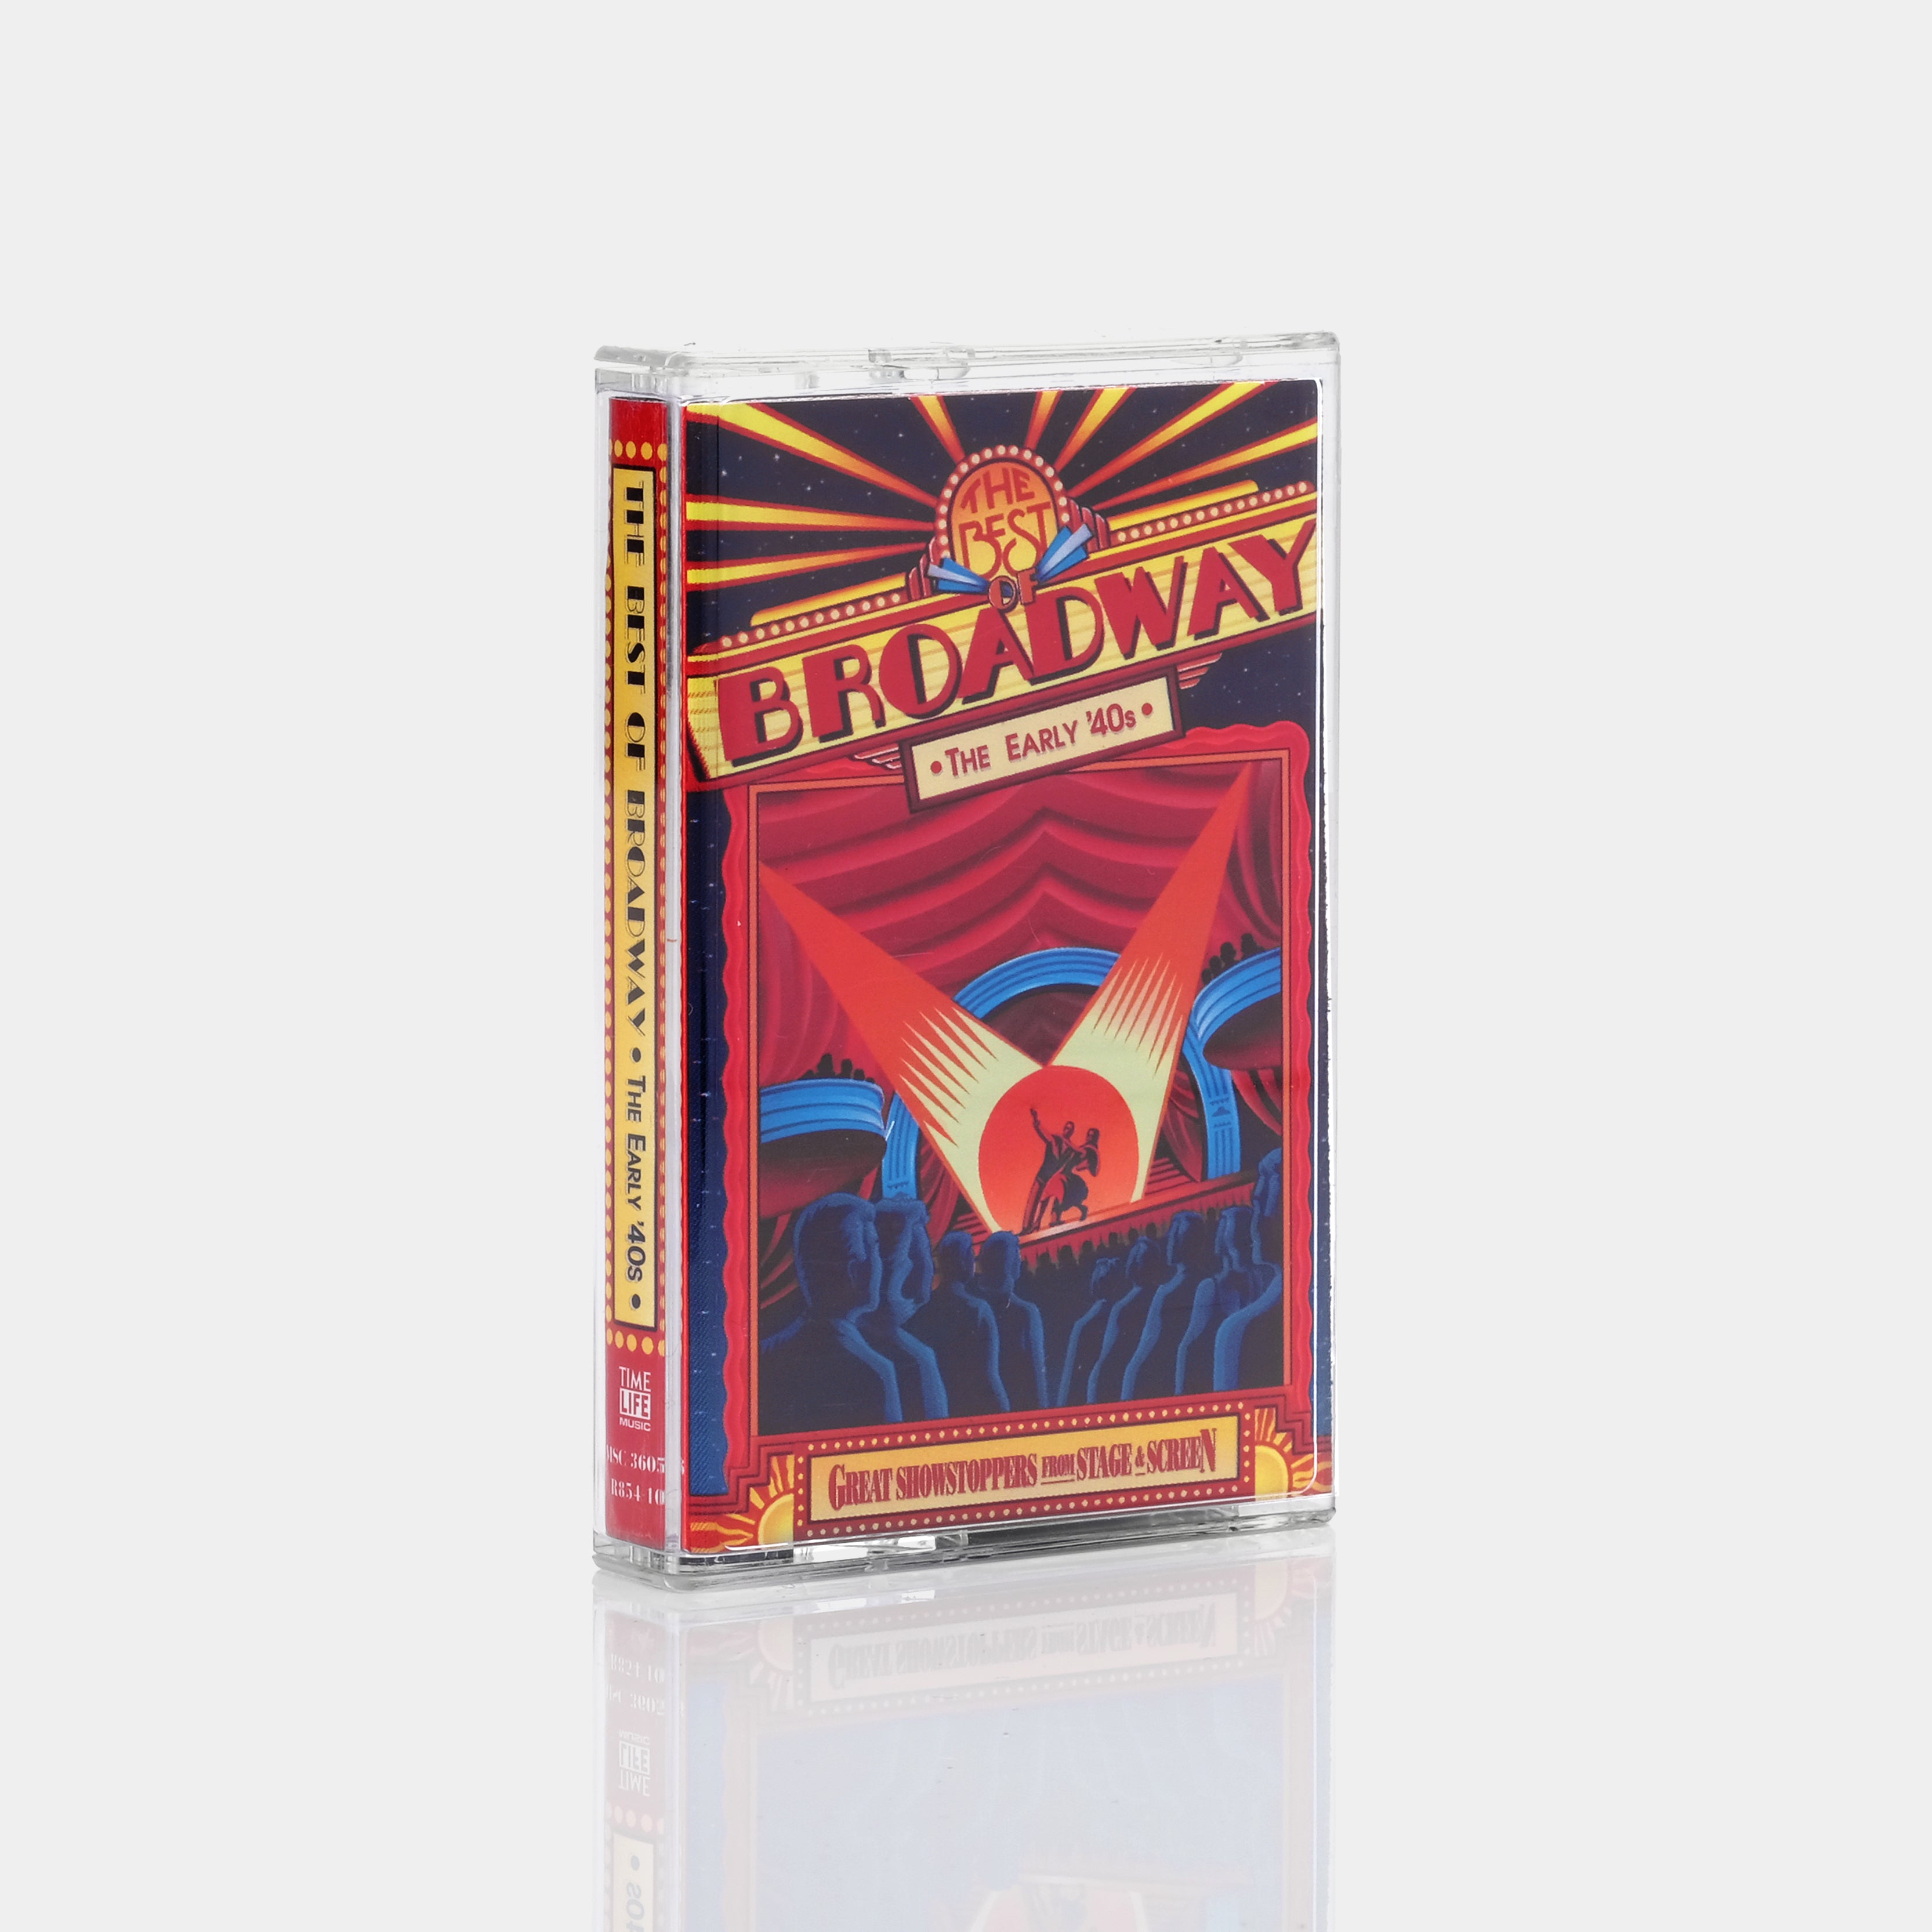 The Best Of Broadway: The Early 40's Cassette Tape